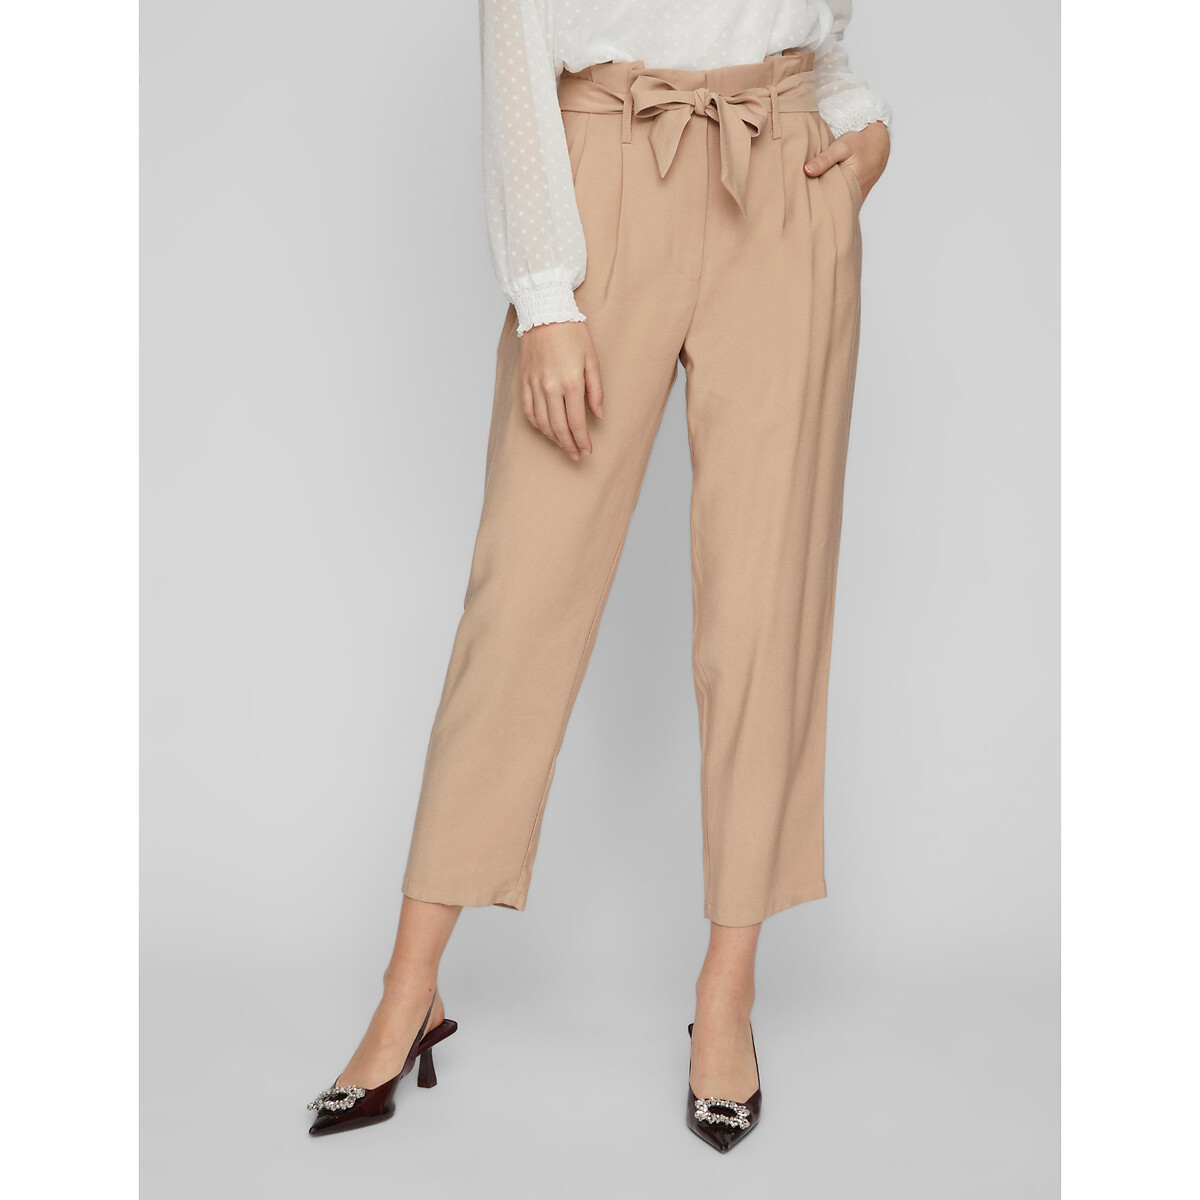 Ankle Grazer Trousers with High Waist